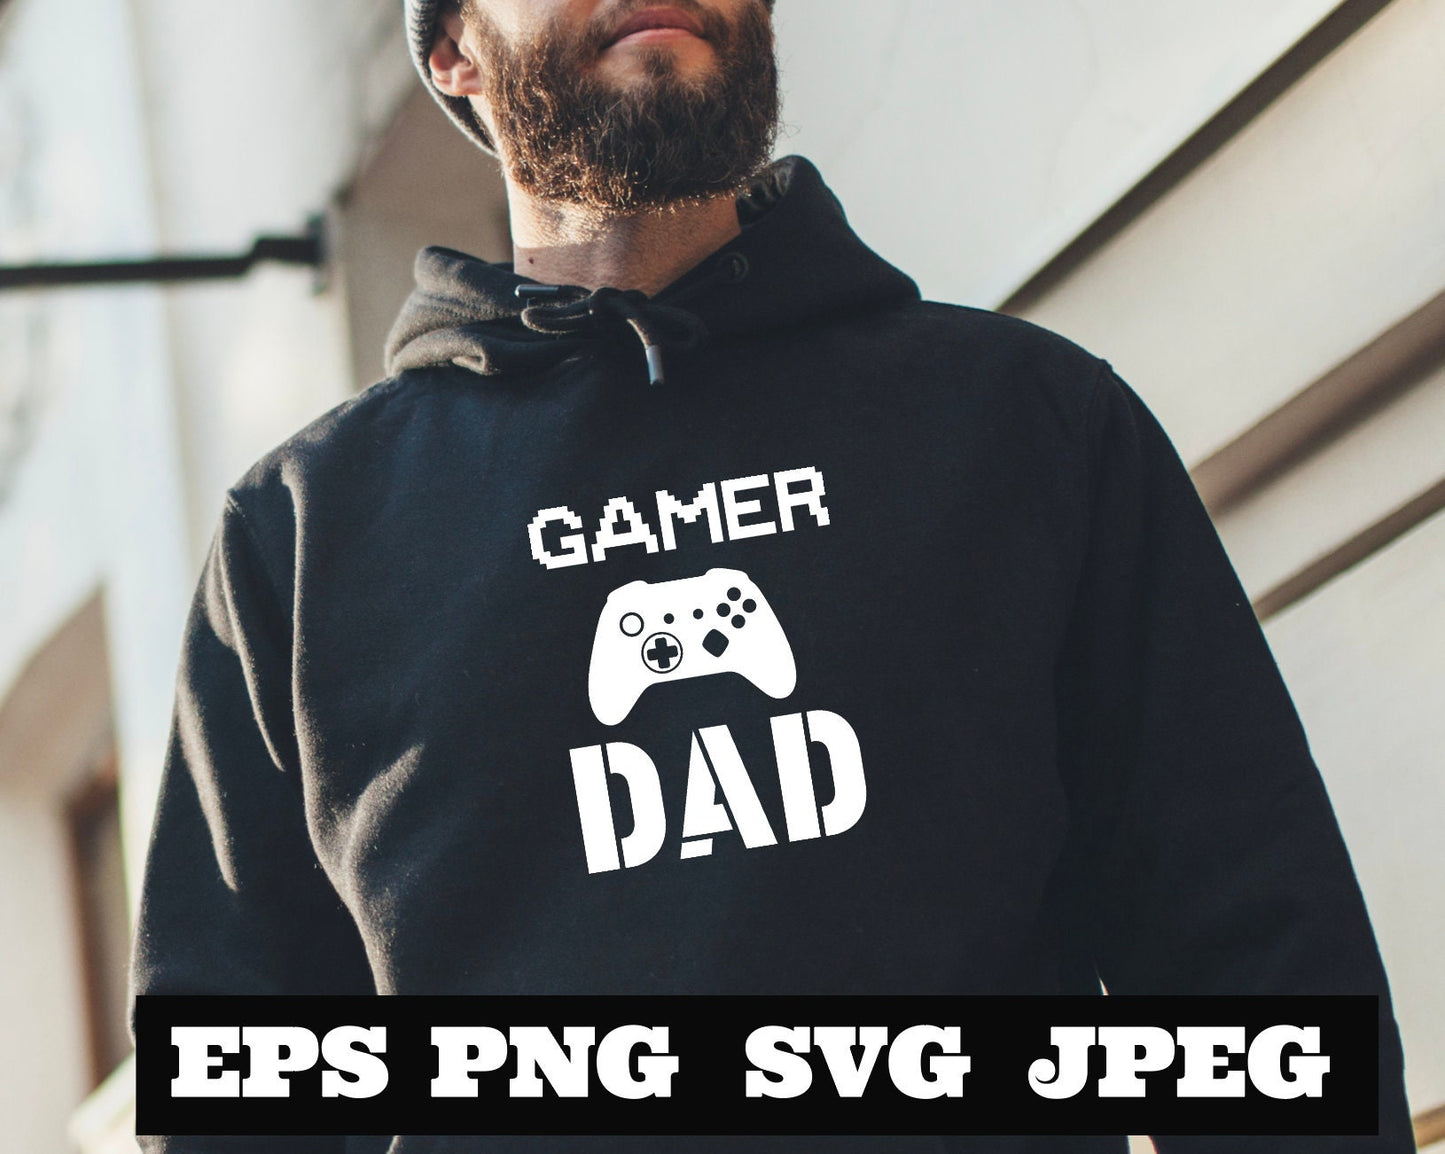 Gamer DAD SVG PNG jpeg, Father Svg, Father’s Day Svg, Dad Quote, Dad Designs Cricut Cut Files Silhouette T shirt Daddy Svg Dads Shirt hoodie